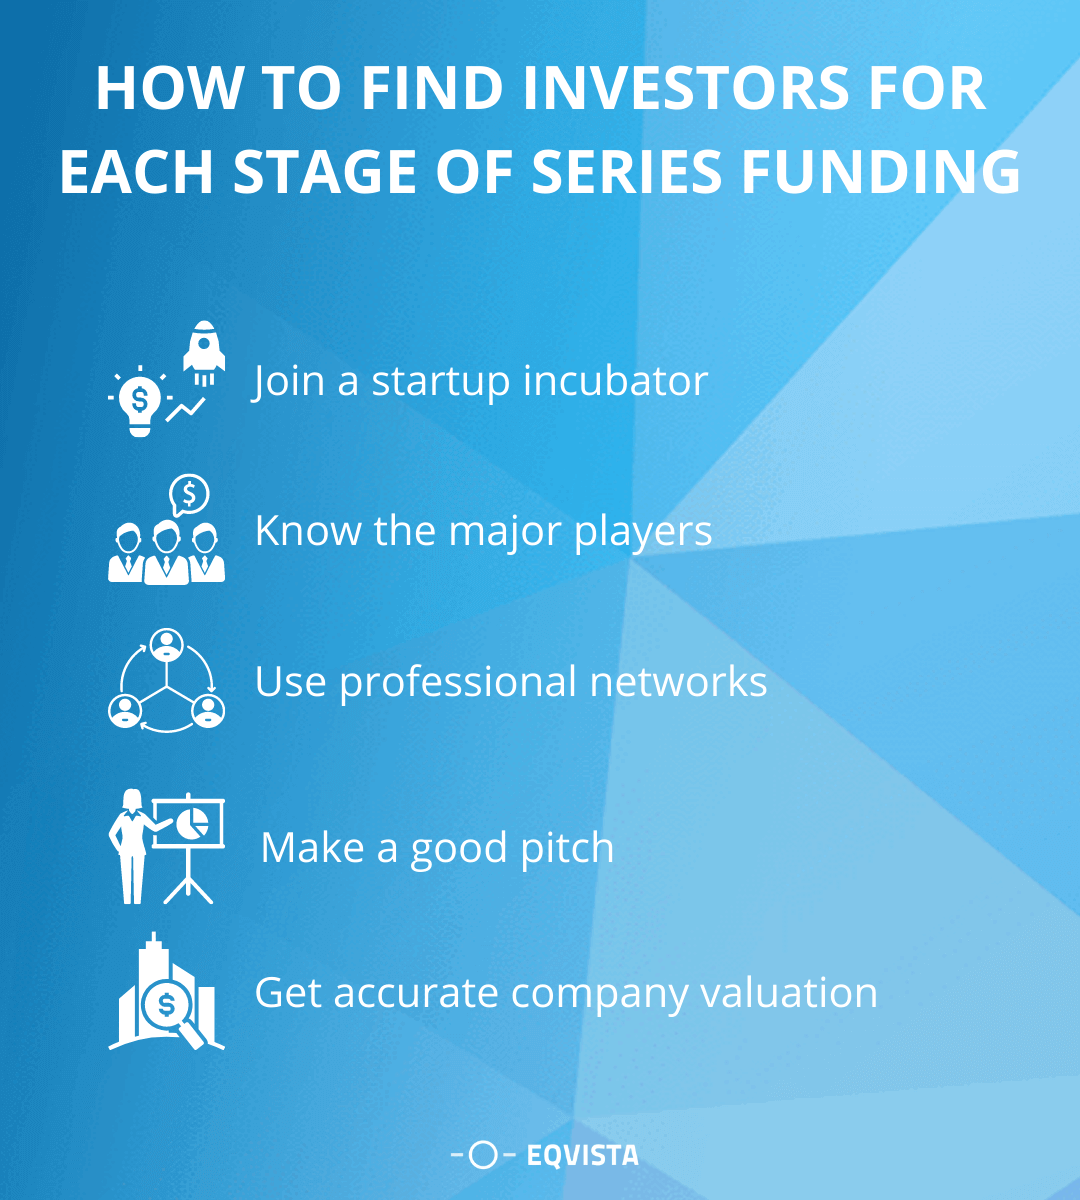   How to find investors for each stage of series funding? 